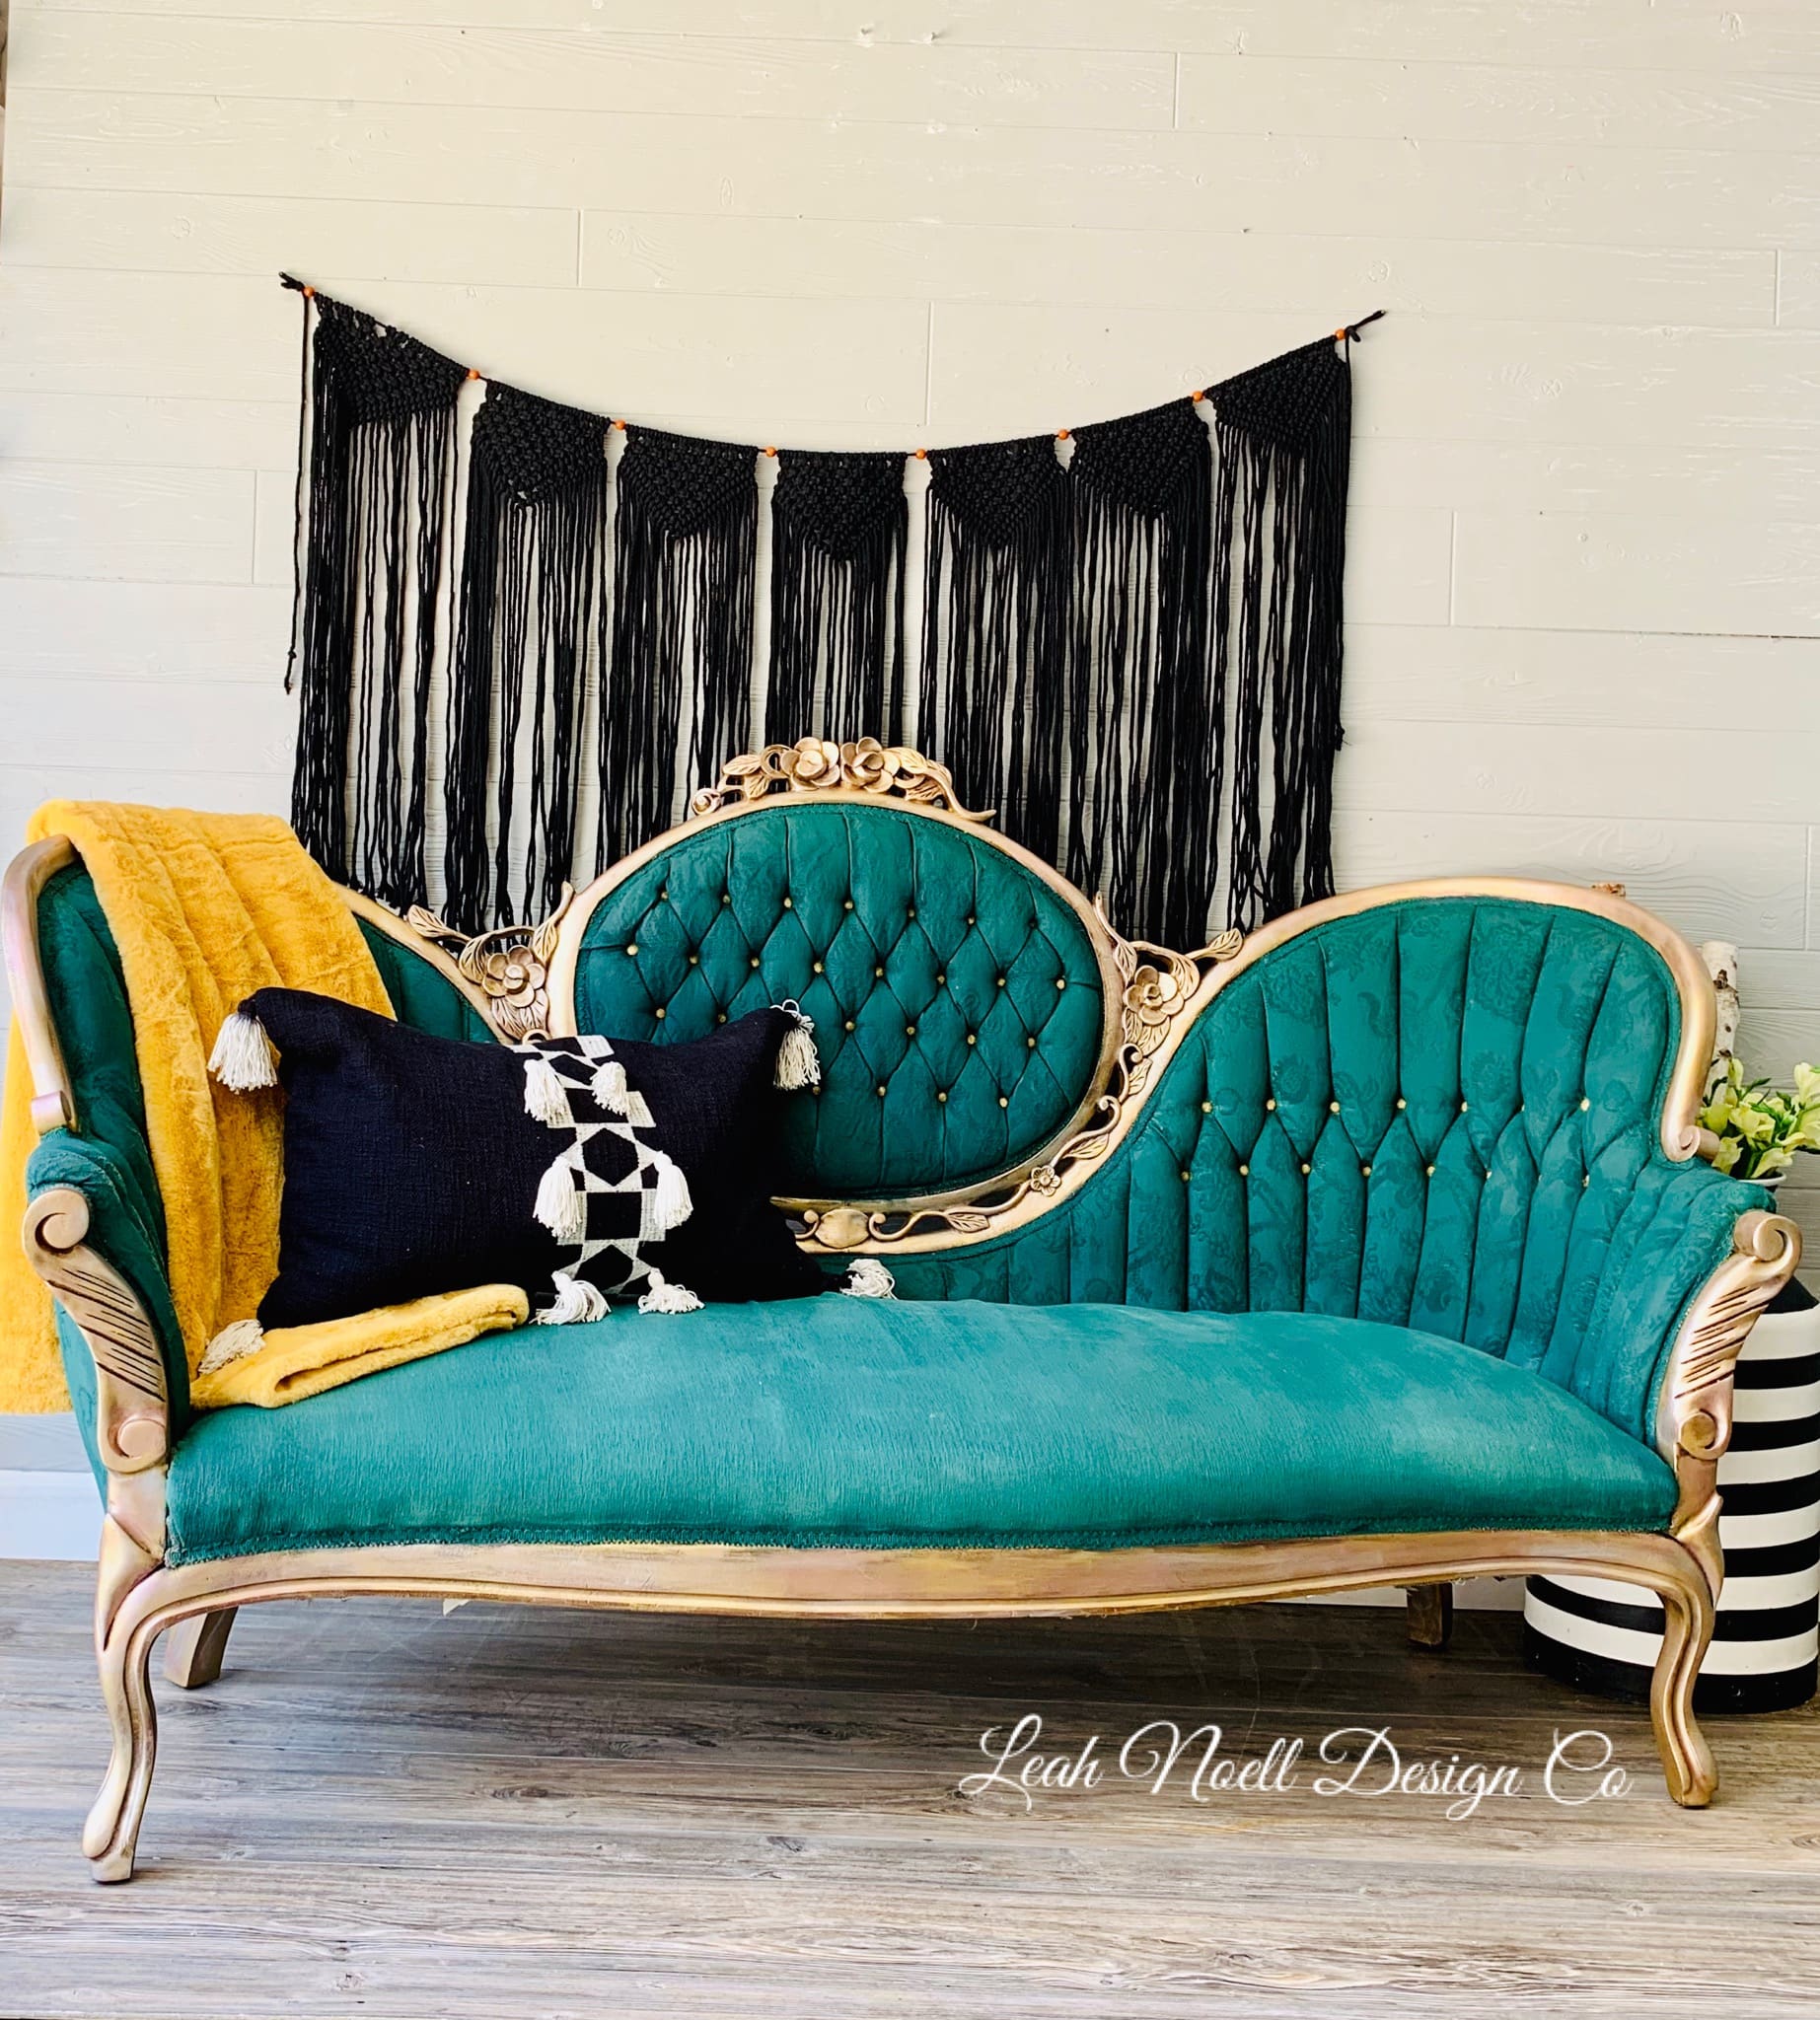 How to paint an upholstered sofa – Leah Noell Design Co